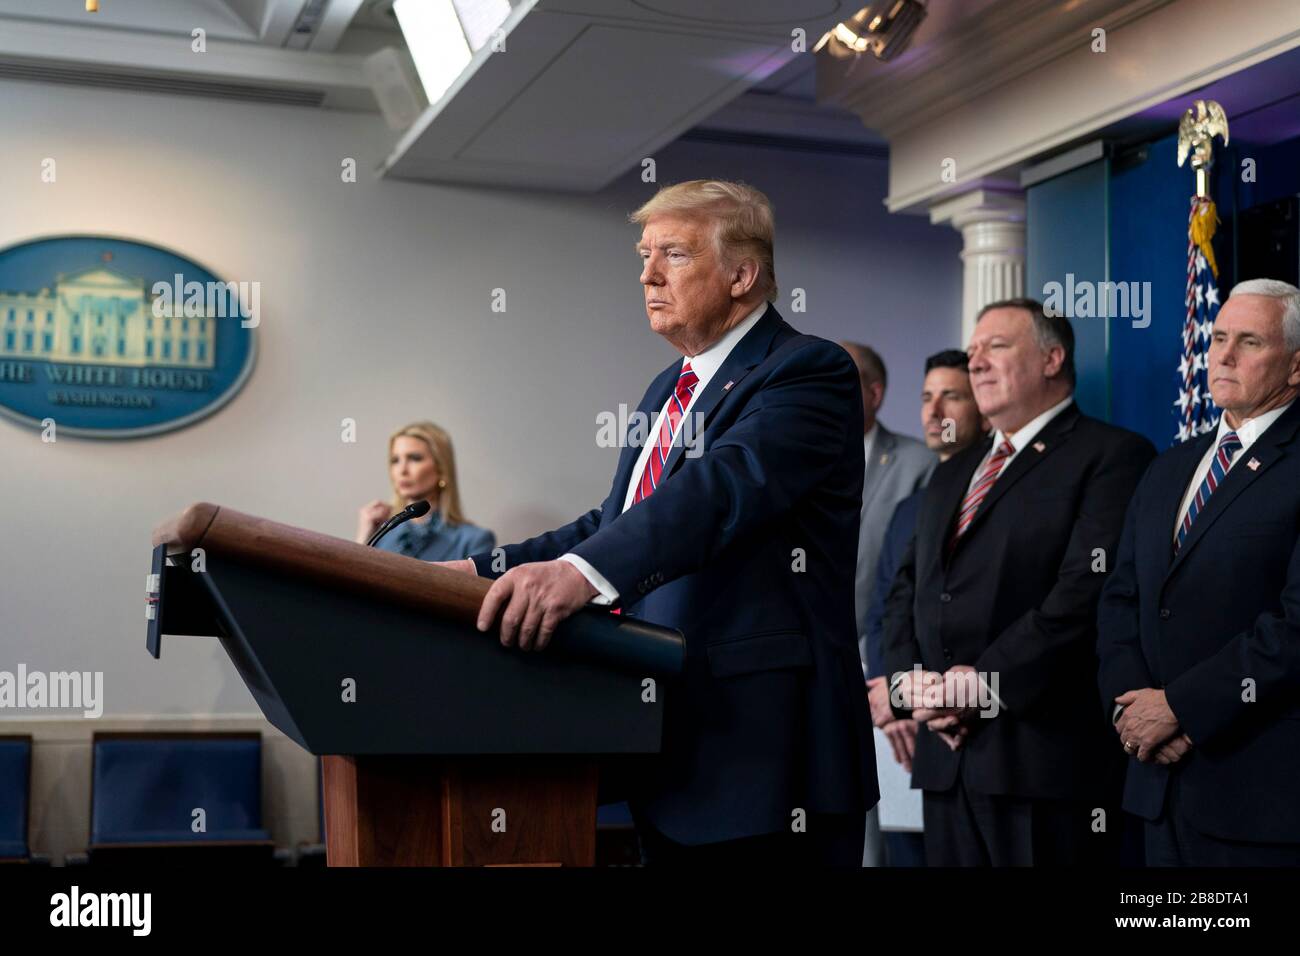 Washington, United States Of America. 20th Mar, 2020. Washington, United States of America. 20 March, 2020. U.S President Donald Trump delivers remarks at the White House Coronavirus Task Force briefing in the Press Briefing Room of the White House March 20, 2020 in Washington, DC. Standing behind the president from left to right are: First daughter Ivanka Trump, Acting Secretary of Homeland Security Chad Wolf, Secretary of State Mike Pompeo and Vice President Mike Pence. Credit: Shealah Craighead/White House Photo/Alamy Live News Stock Photo